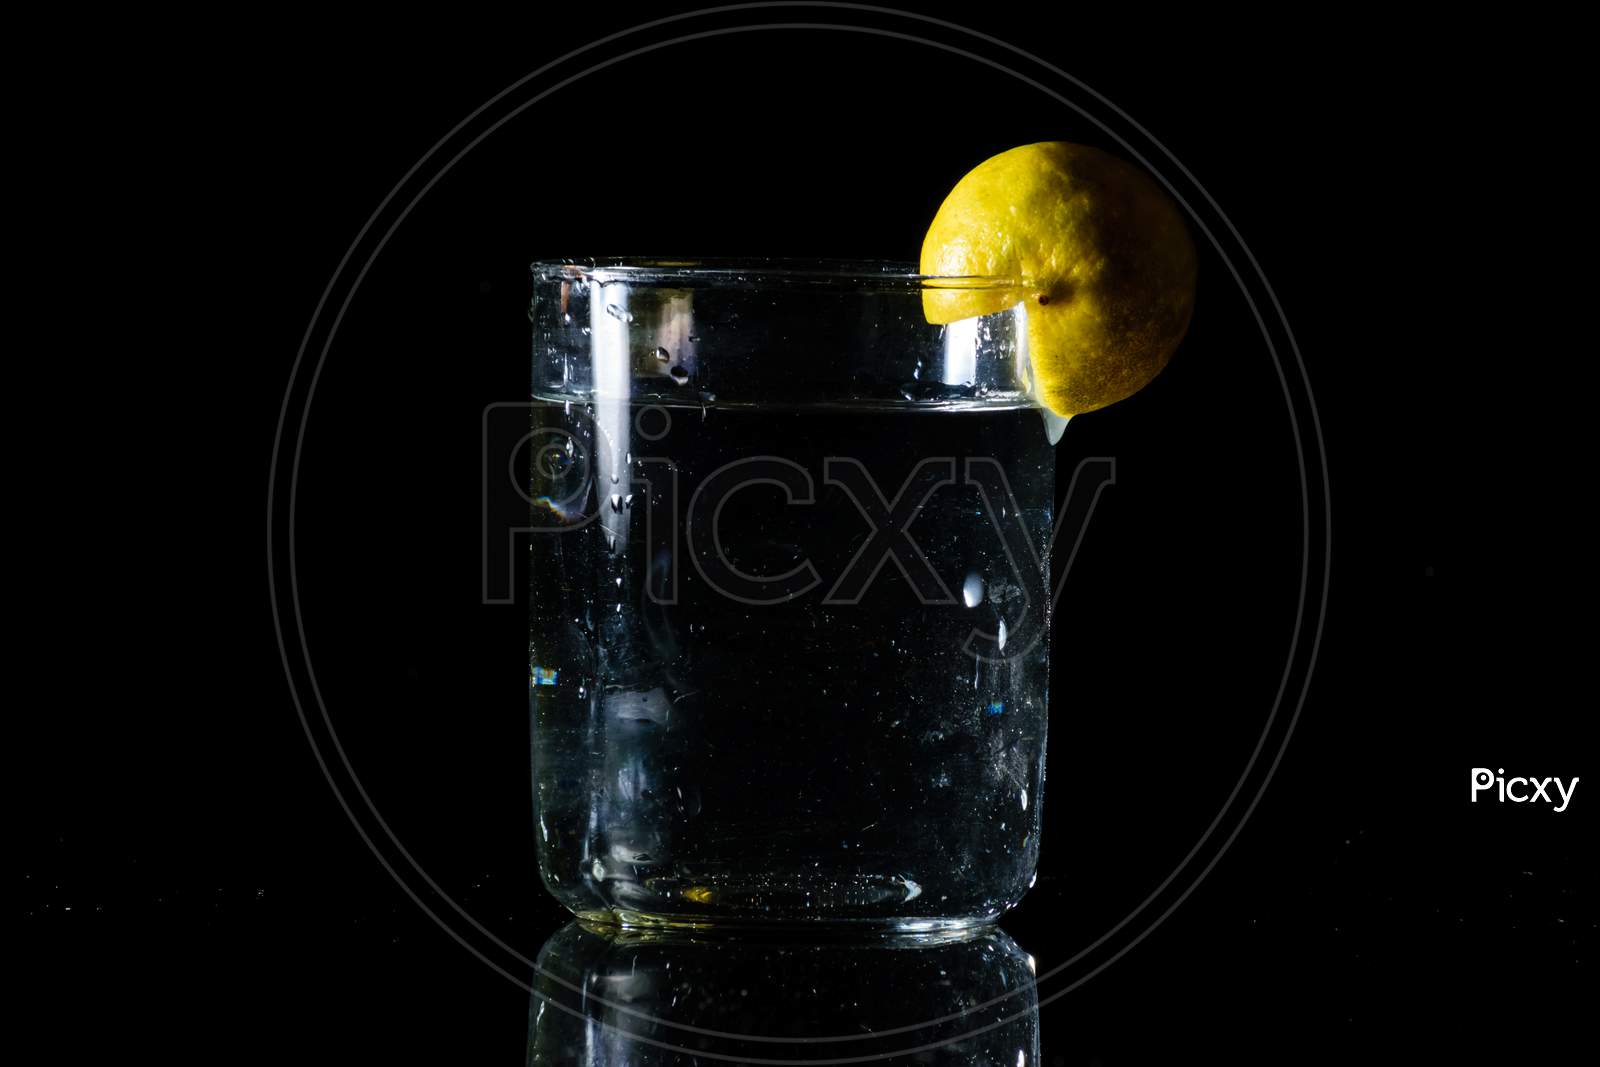 A Glass Of Water Placed On A Reflective Surface In A Dark Background And A Cut Lemon On The Edge Of The Glass